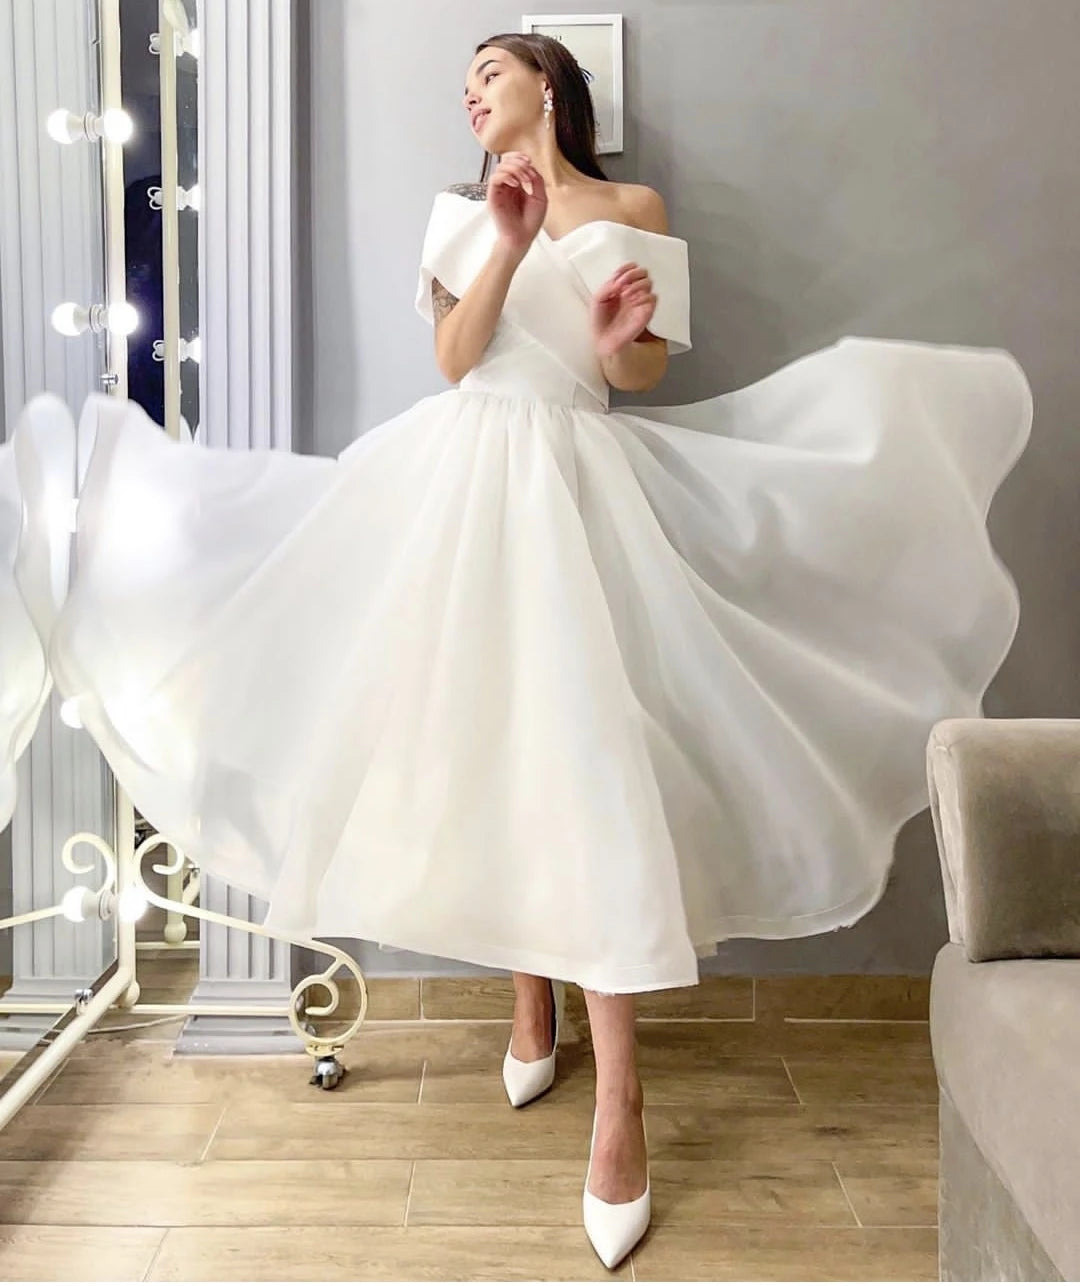 Short Wedding Dress Off The Shoulder A-Line Satin Short Ankle Length Bridal Gown Customize To Measures Simple